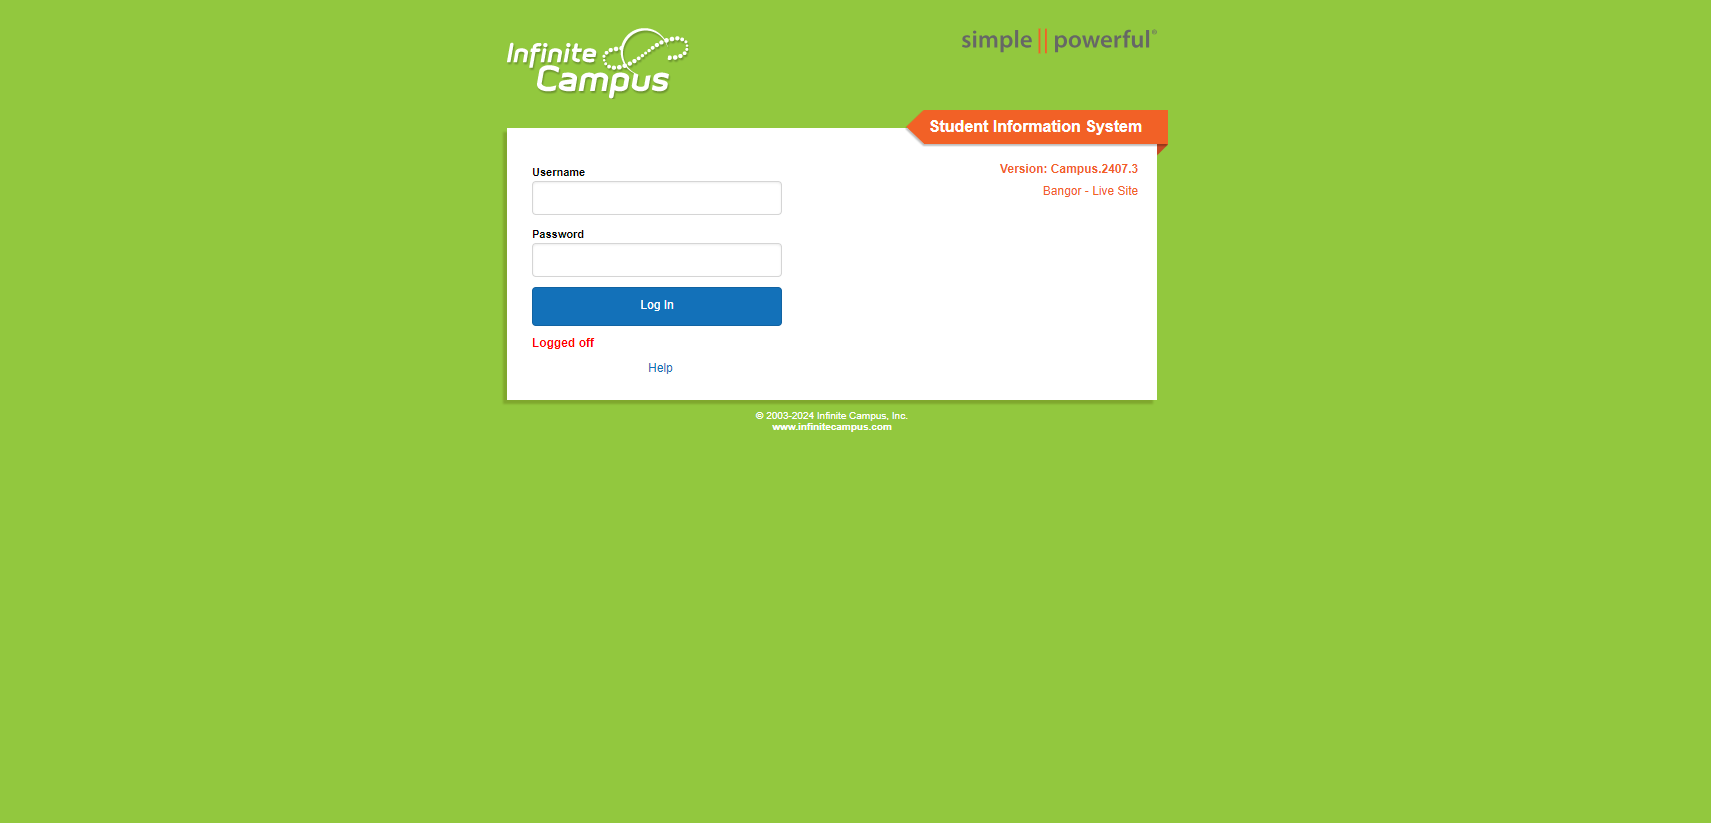 Current grading system Infinite Campus, log in screen with white background.